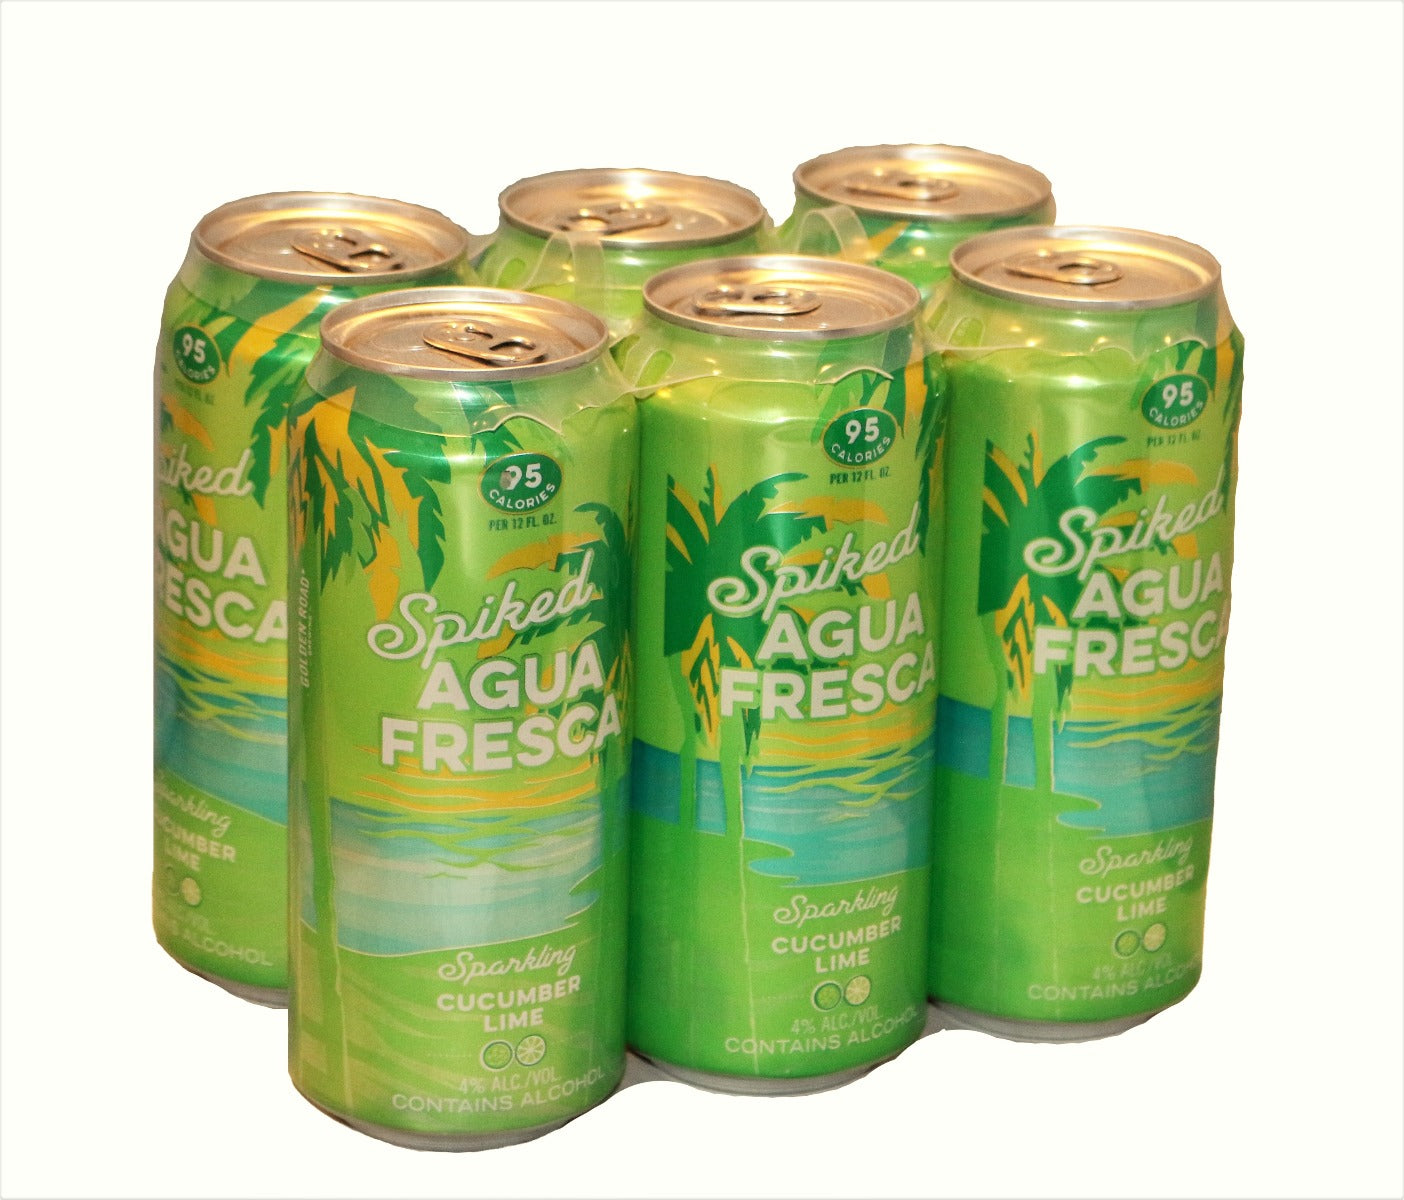 SPIKED AGUA FRESCA CUCUMBER LIME 6X16OZ CANS - Remedy Liquor